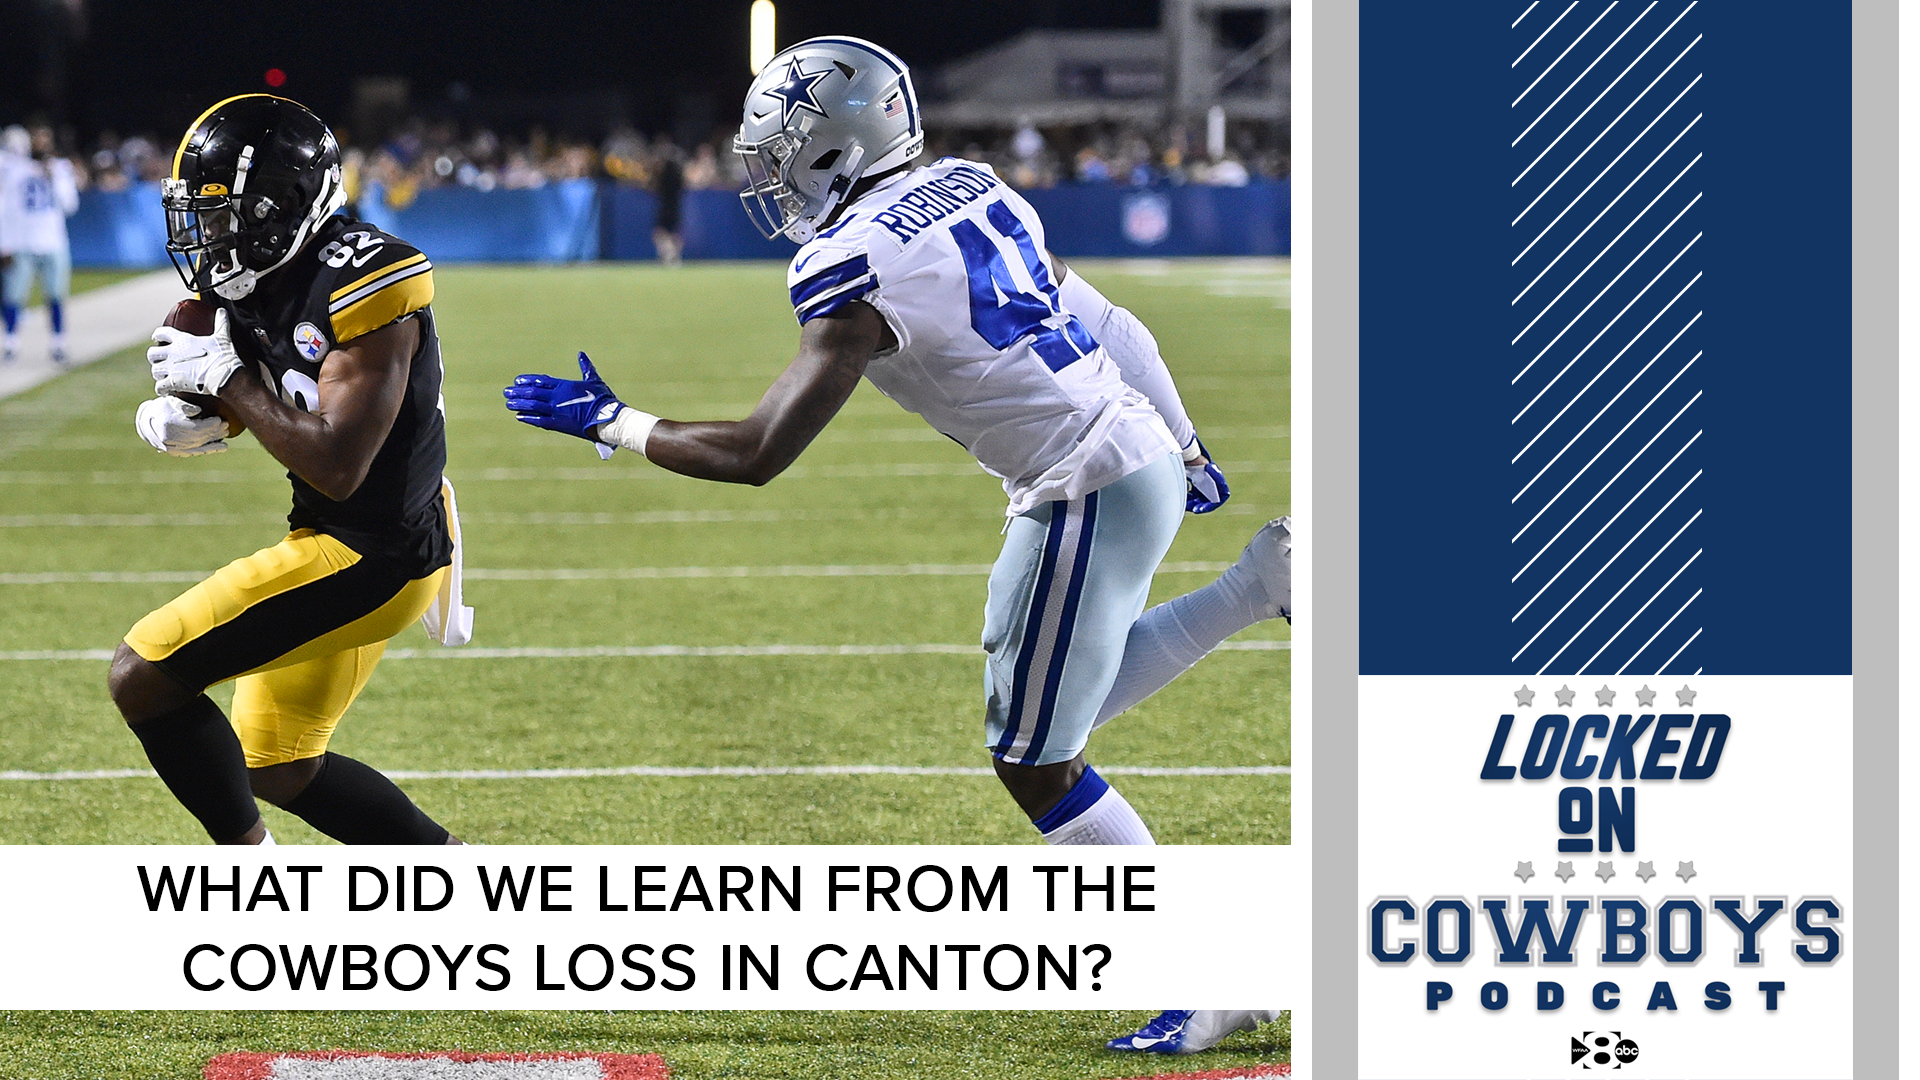 The Cowboys lost, but it's just preseason. @Marcus_Mosher and @McCoolBCB discuss Micah Parson's first game and what they learned overall.